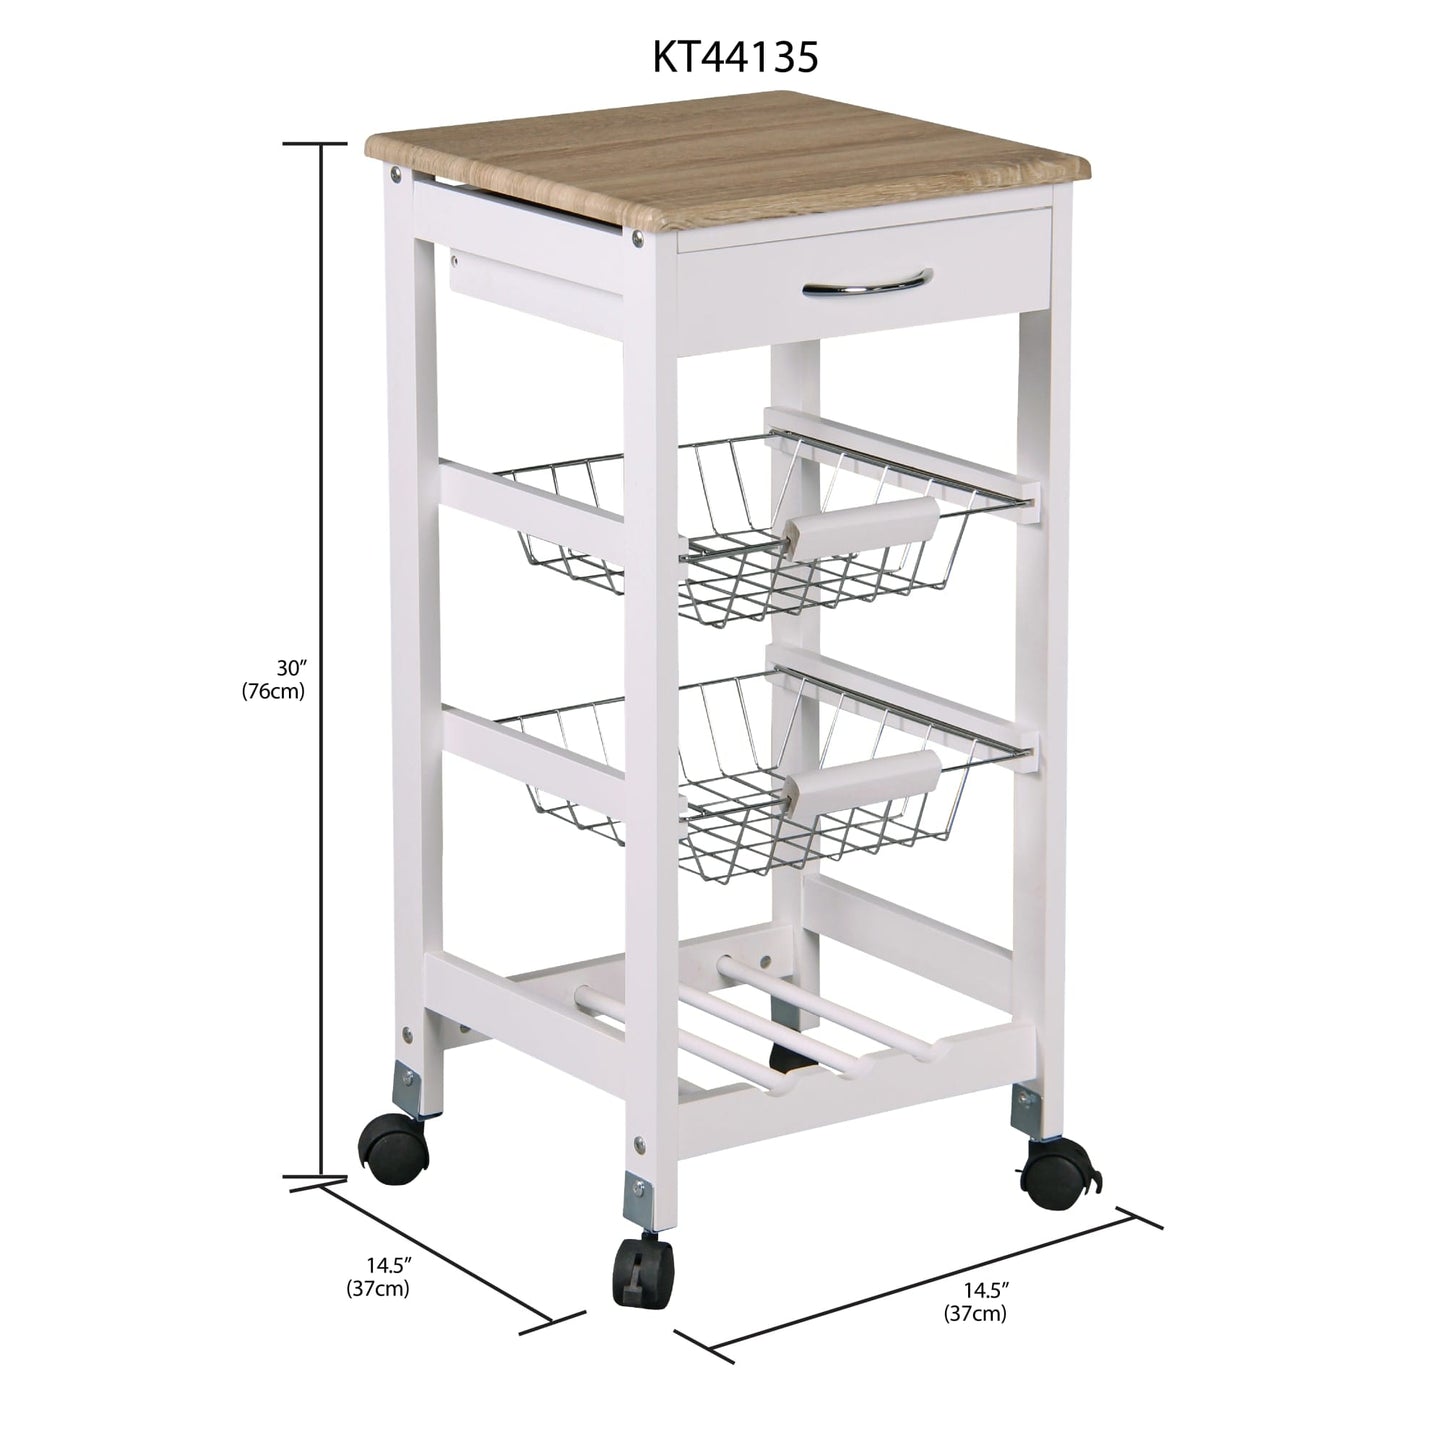 Kitchen Trolley with Drawers and Baskets